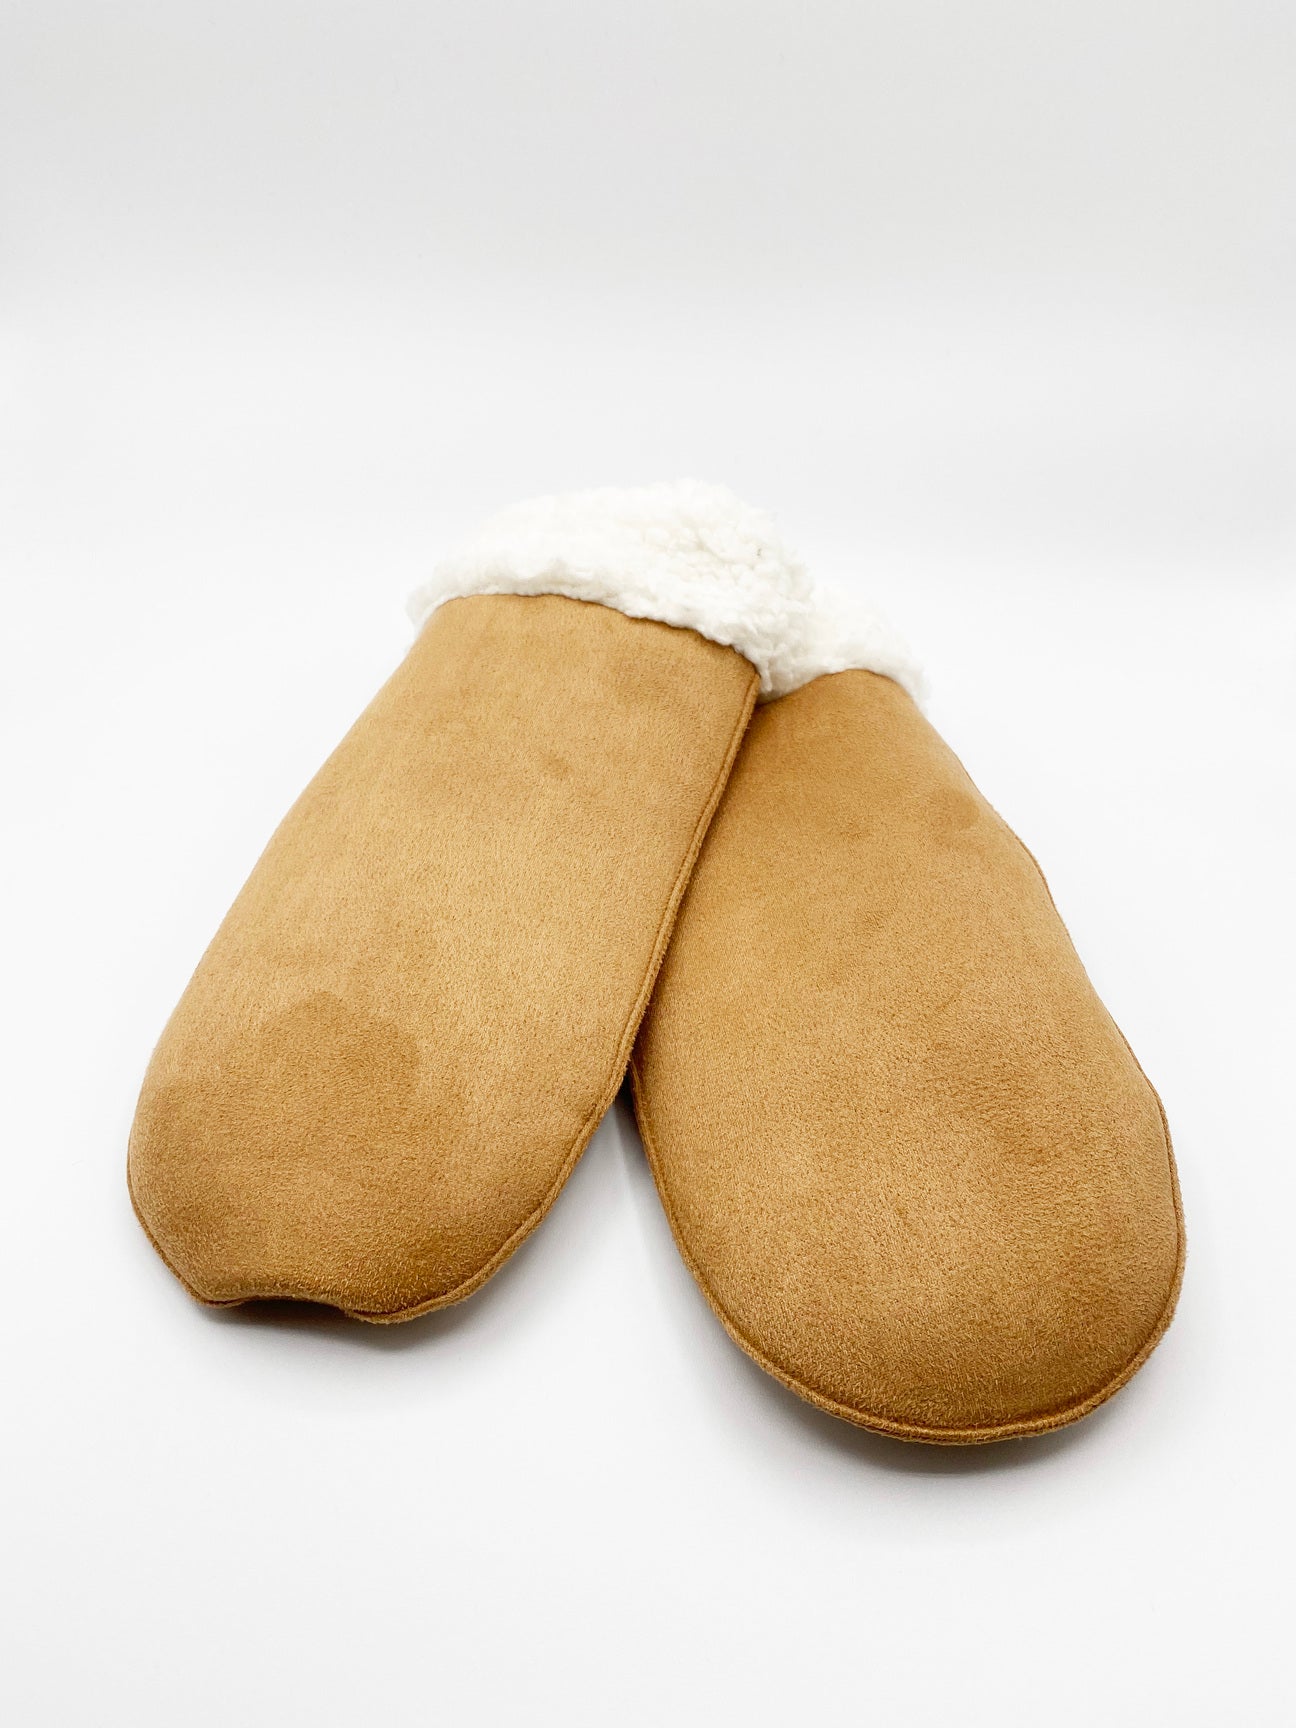 Tan Mittens With White Borg Lining